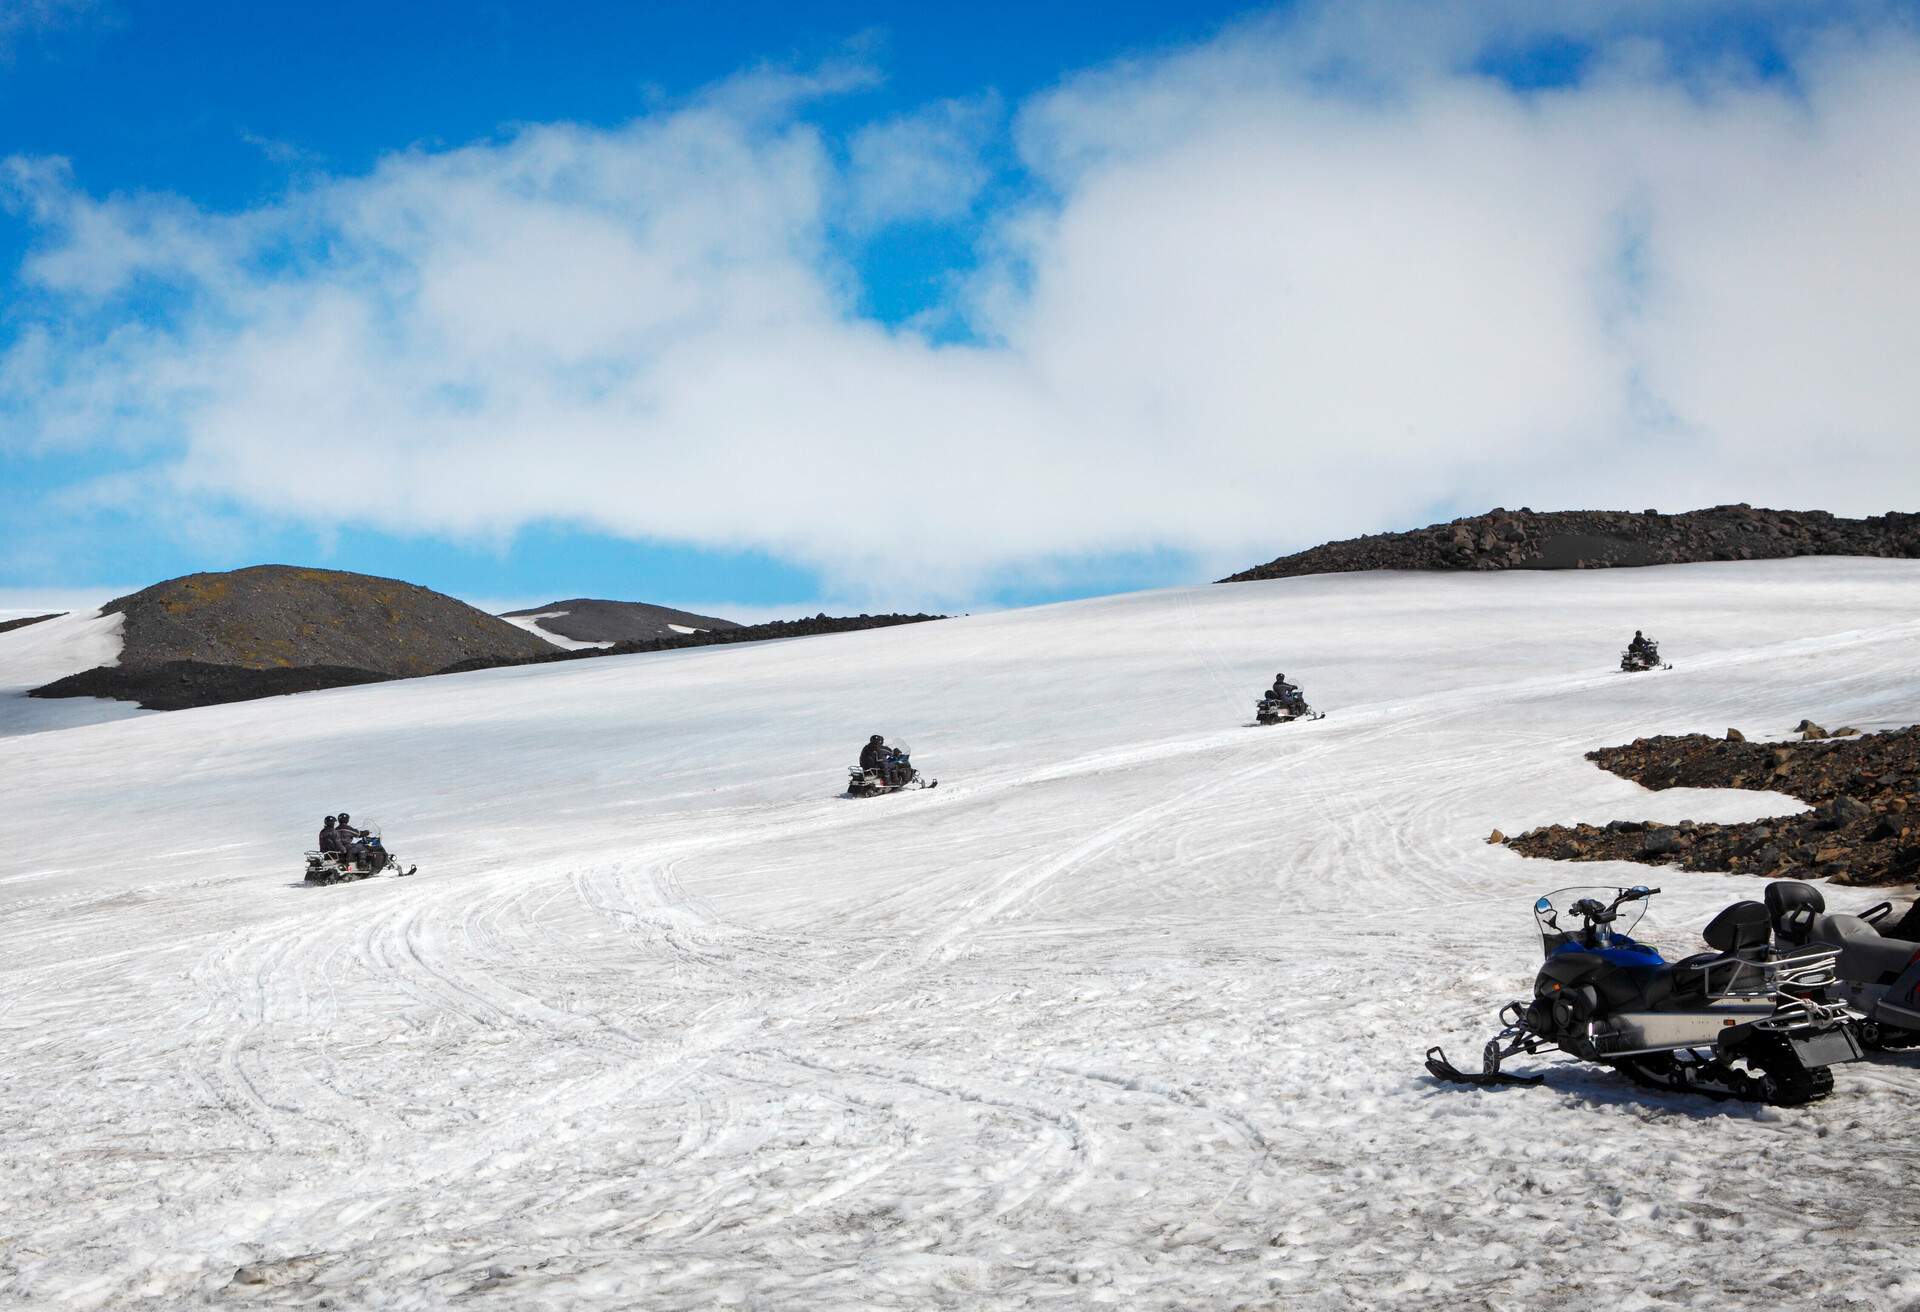 Snow scooters at Mýrdalsjökull glacier in Iceland